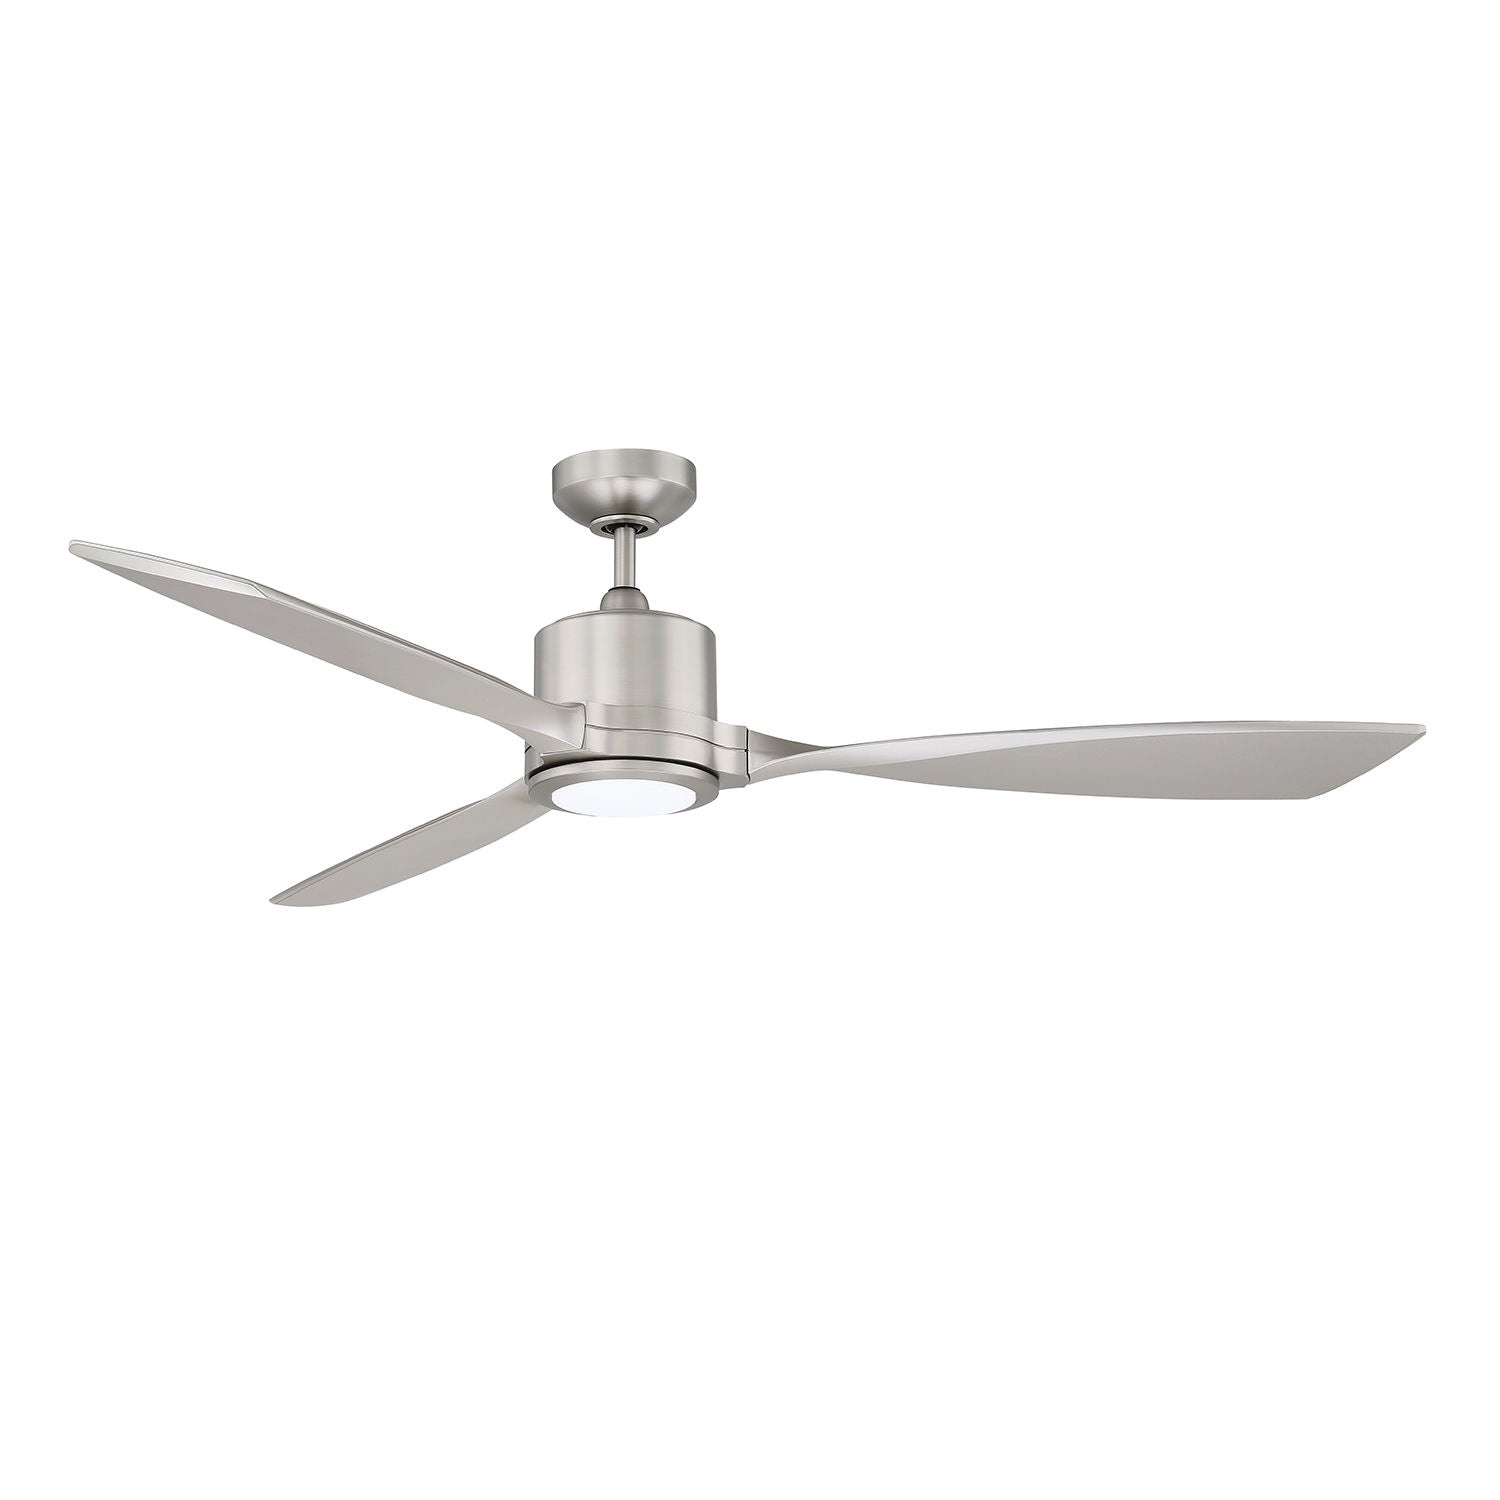 ALTAIR Ceiling fan Stainless steel INTEGRATED LED - AC22160-SN | KENDAL